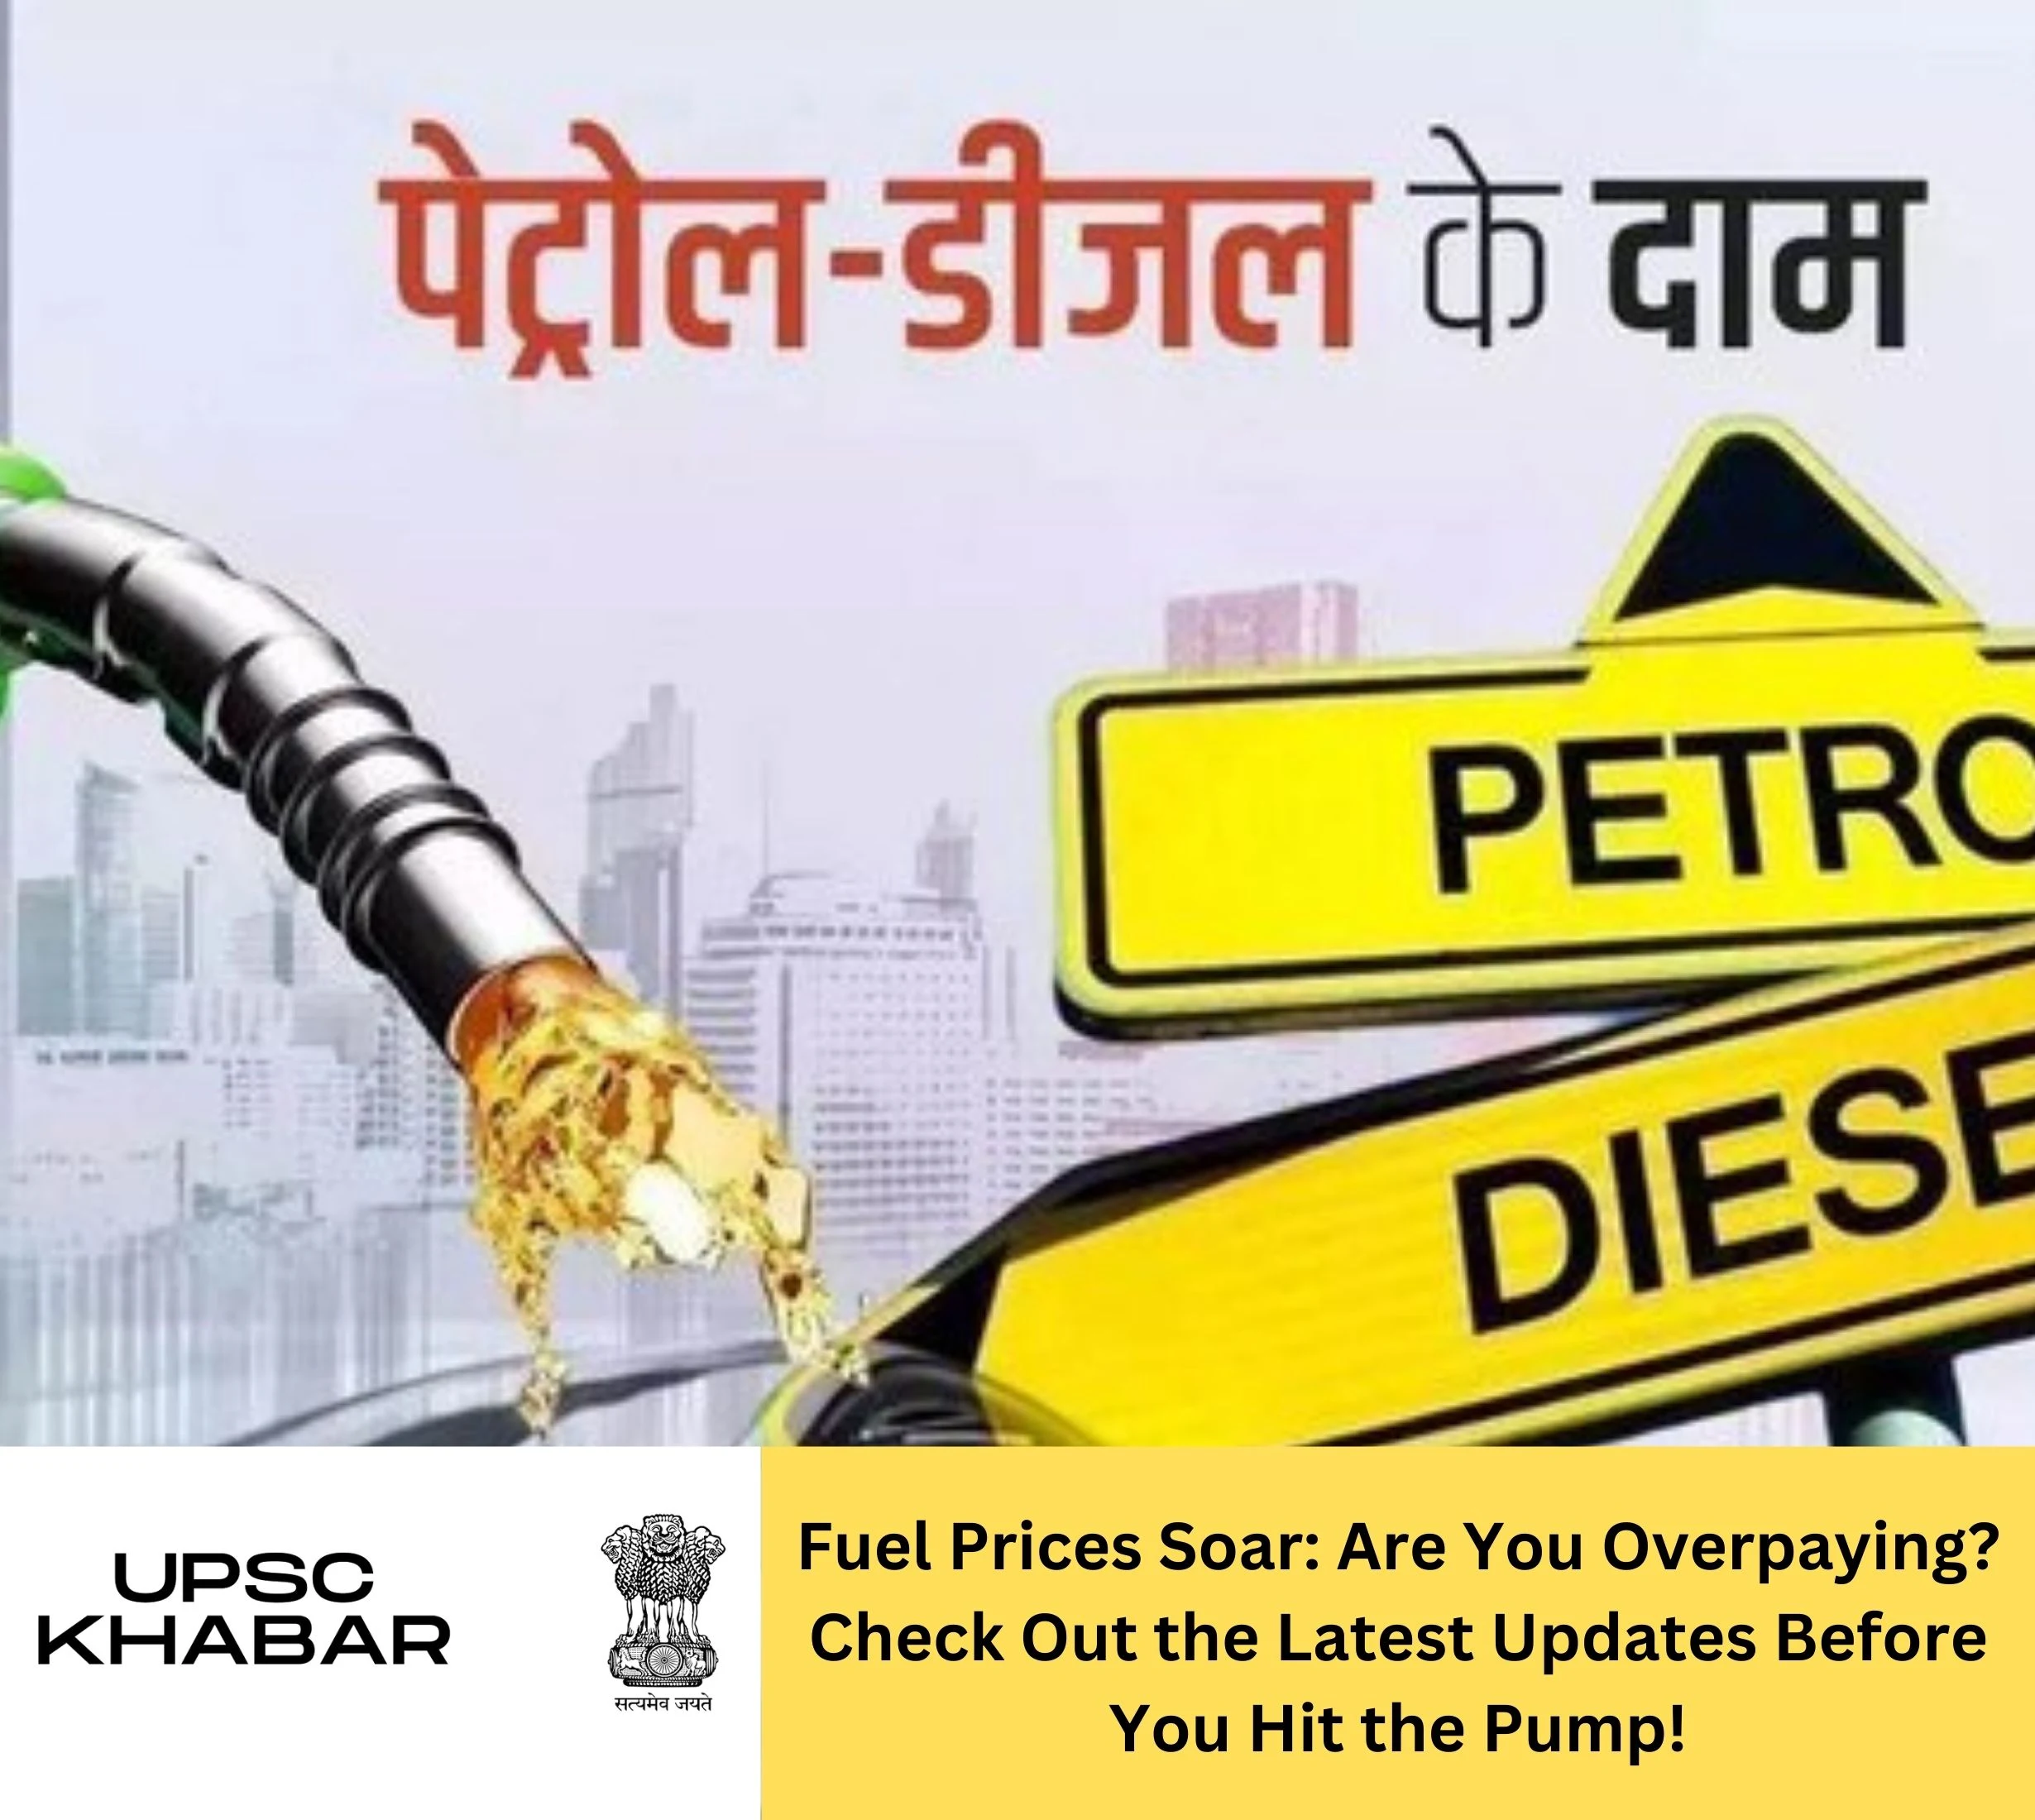 Fuel Prices Soar: Are You Overpaying? Check Out the Latest Updates Before You Hit the Pump!